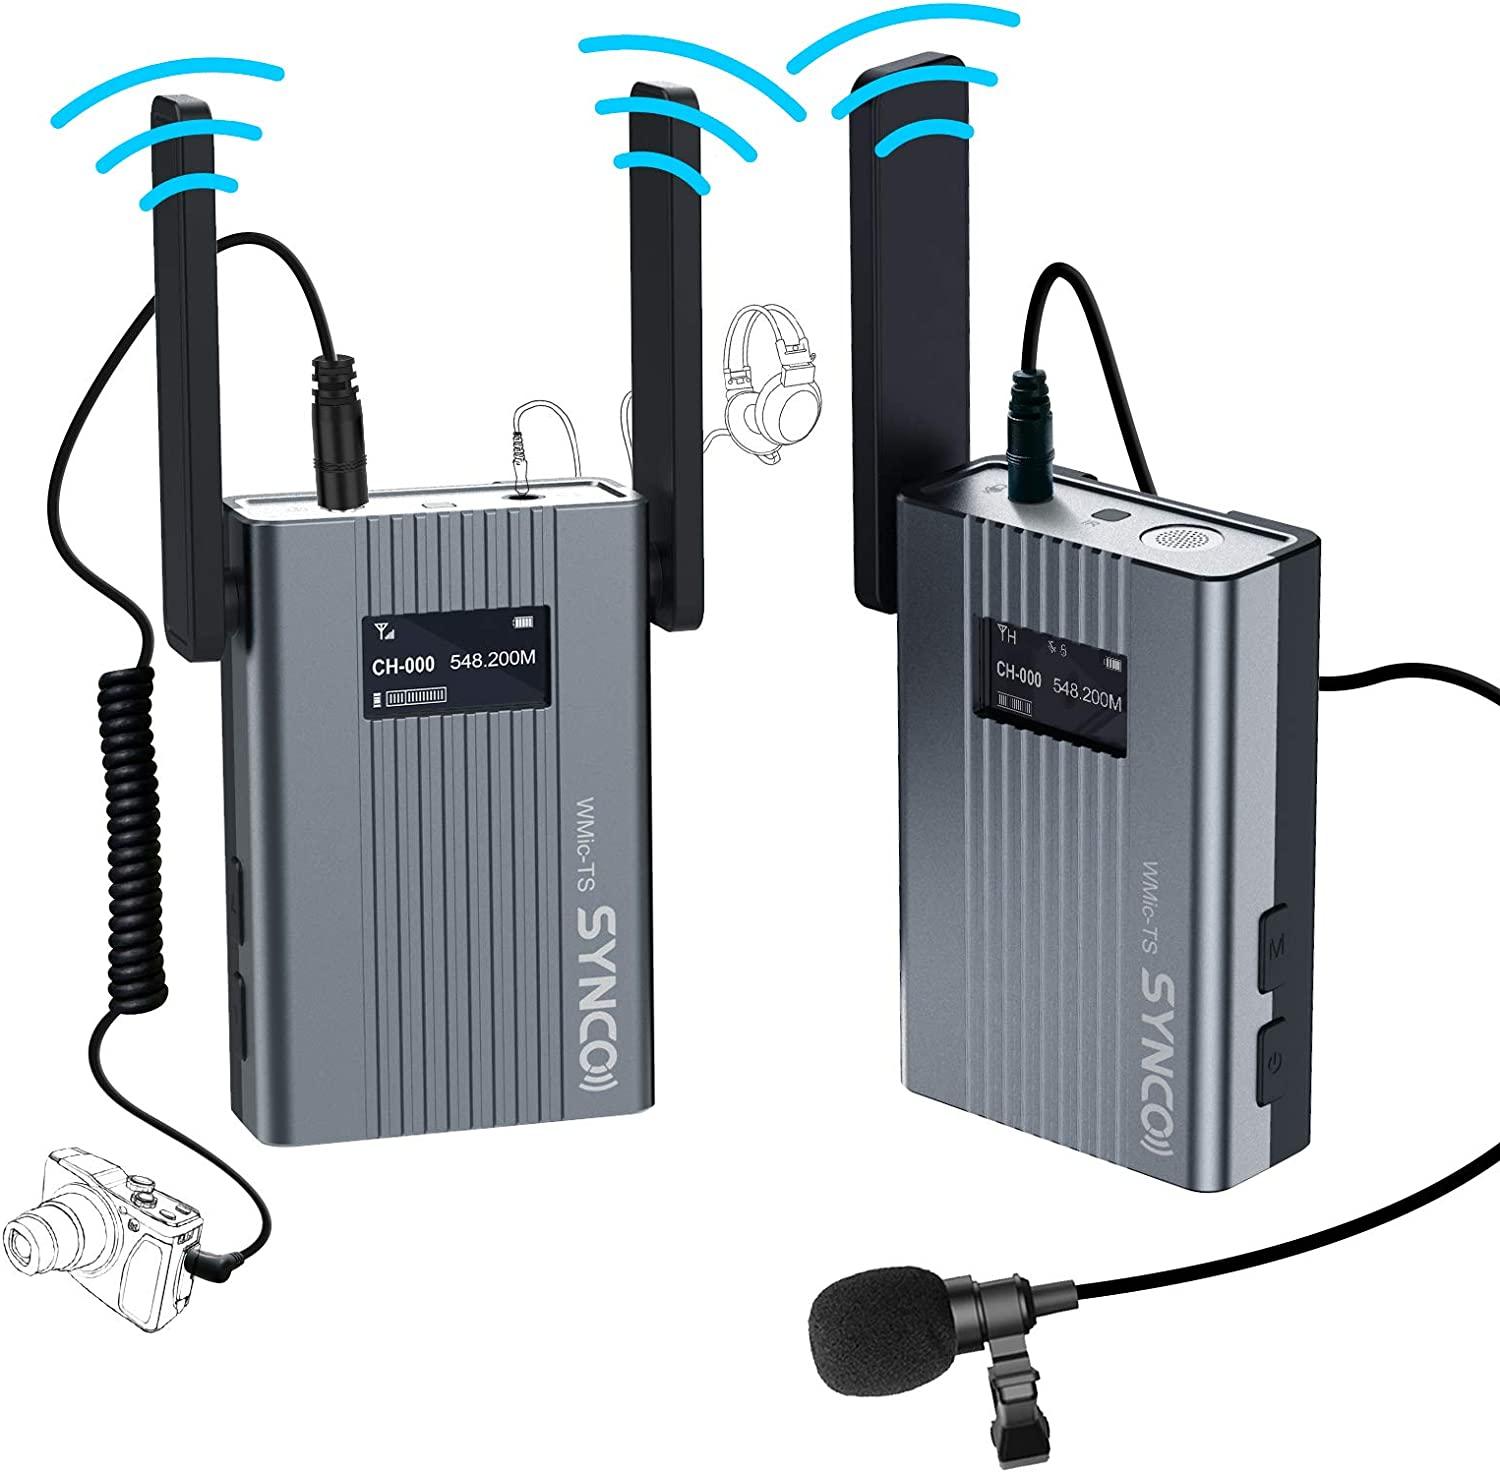 http://www.digitek.net.in/cdn/shop/products/synco-ts-mini-uhf-wireless-lavalier-microphone-system-1-transmitter-1-receiver-mic-60-channels-real-time-monitoring-492ft-for-smartphone-dslrmirrorless-camcorder-laptop-tablet-digitek-1.jpg?v=1698093366